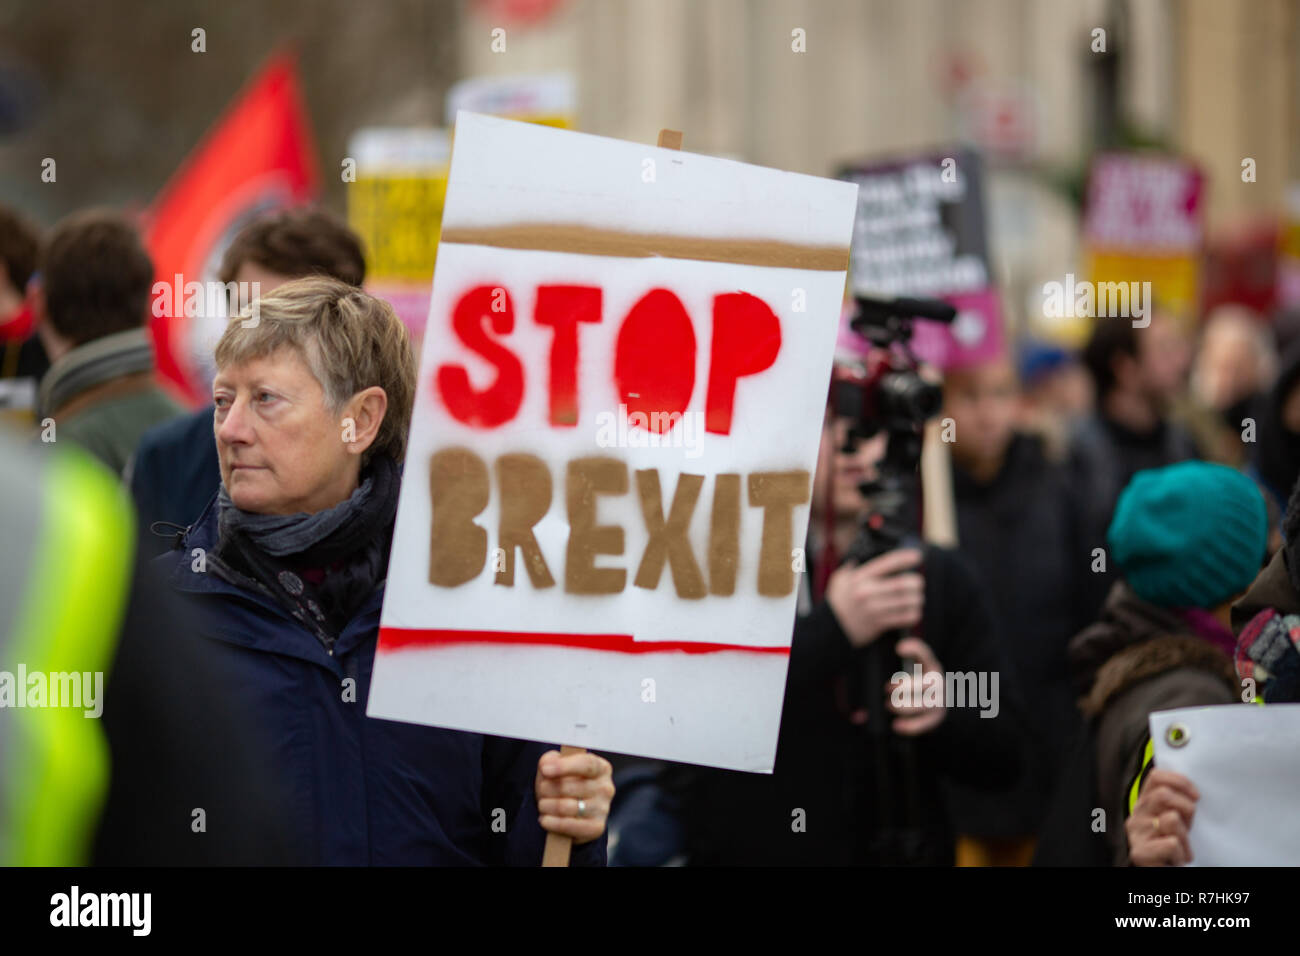 An Anti-Facist demonstrator holds up a 'Stop Brexit' sign.  3,000 Pro-Brexit demonstrators and 15,000 Anti-Facist counter demonstrators took to the streets of London to voice their stance on the deal ahead of the key Brexit vote in parliament this Tuesday. Stock Photo